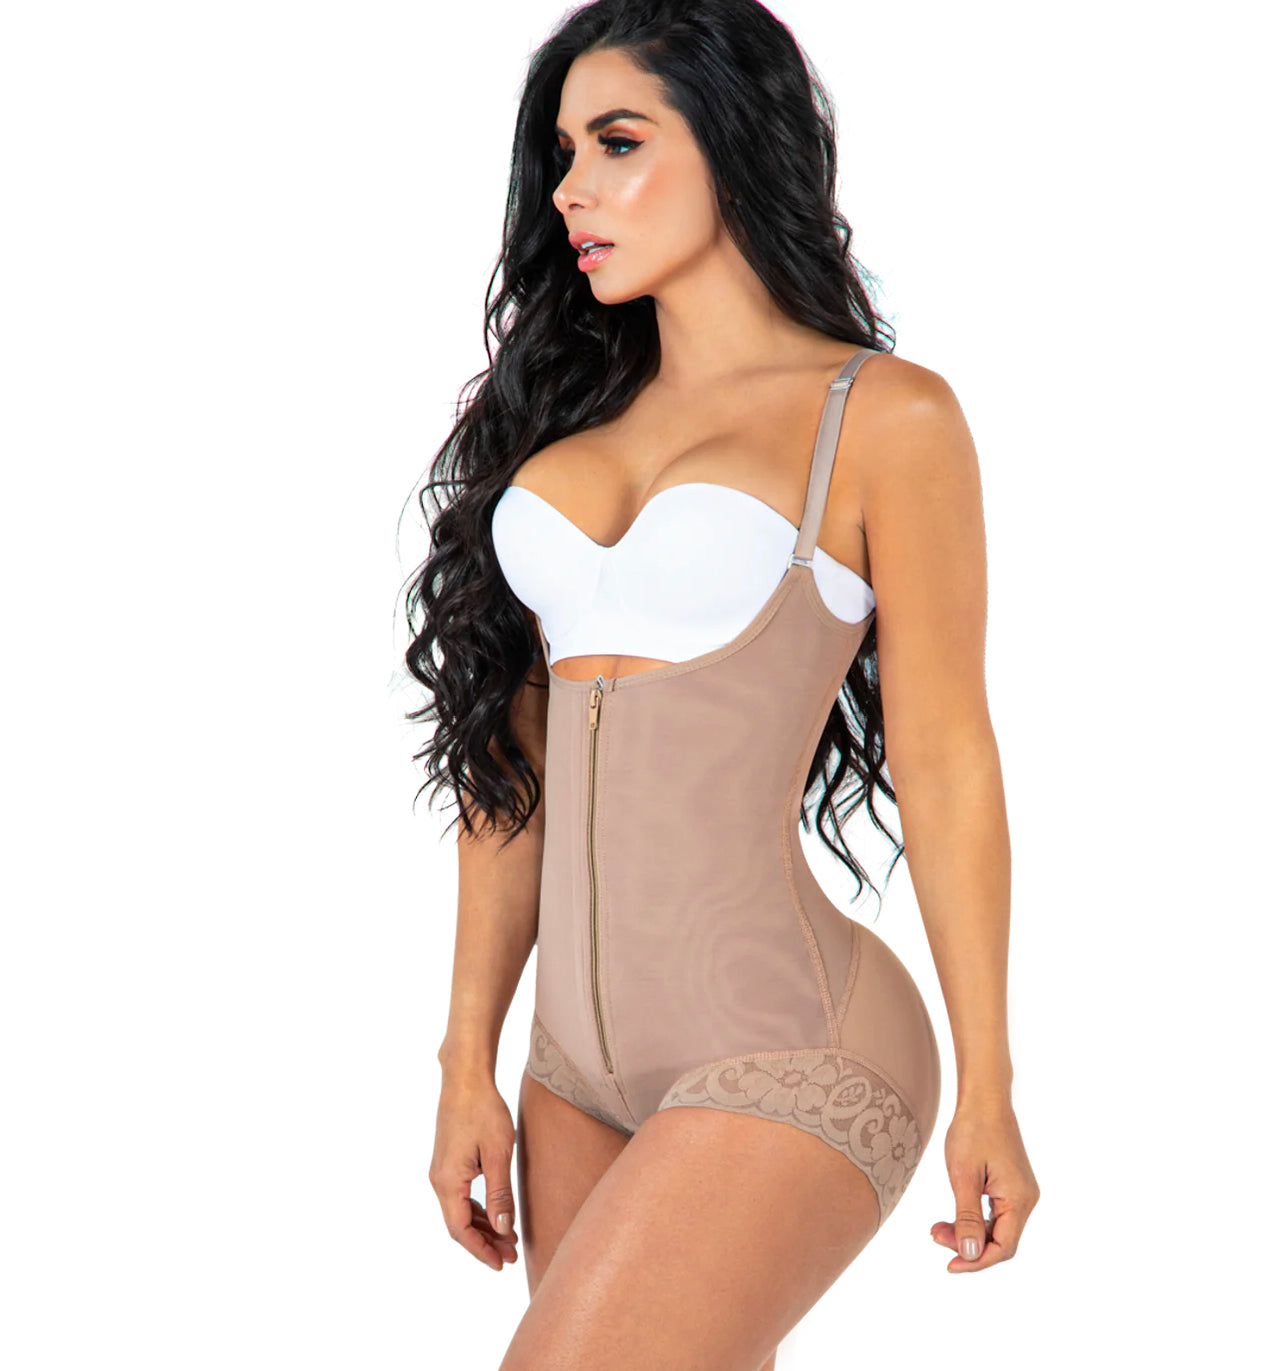 KB-1415 Bodysuit Panty with covered back